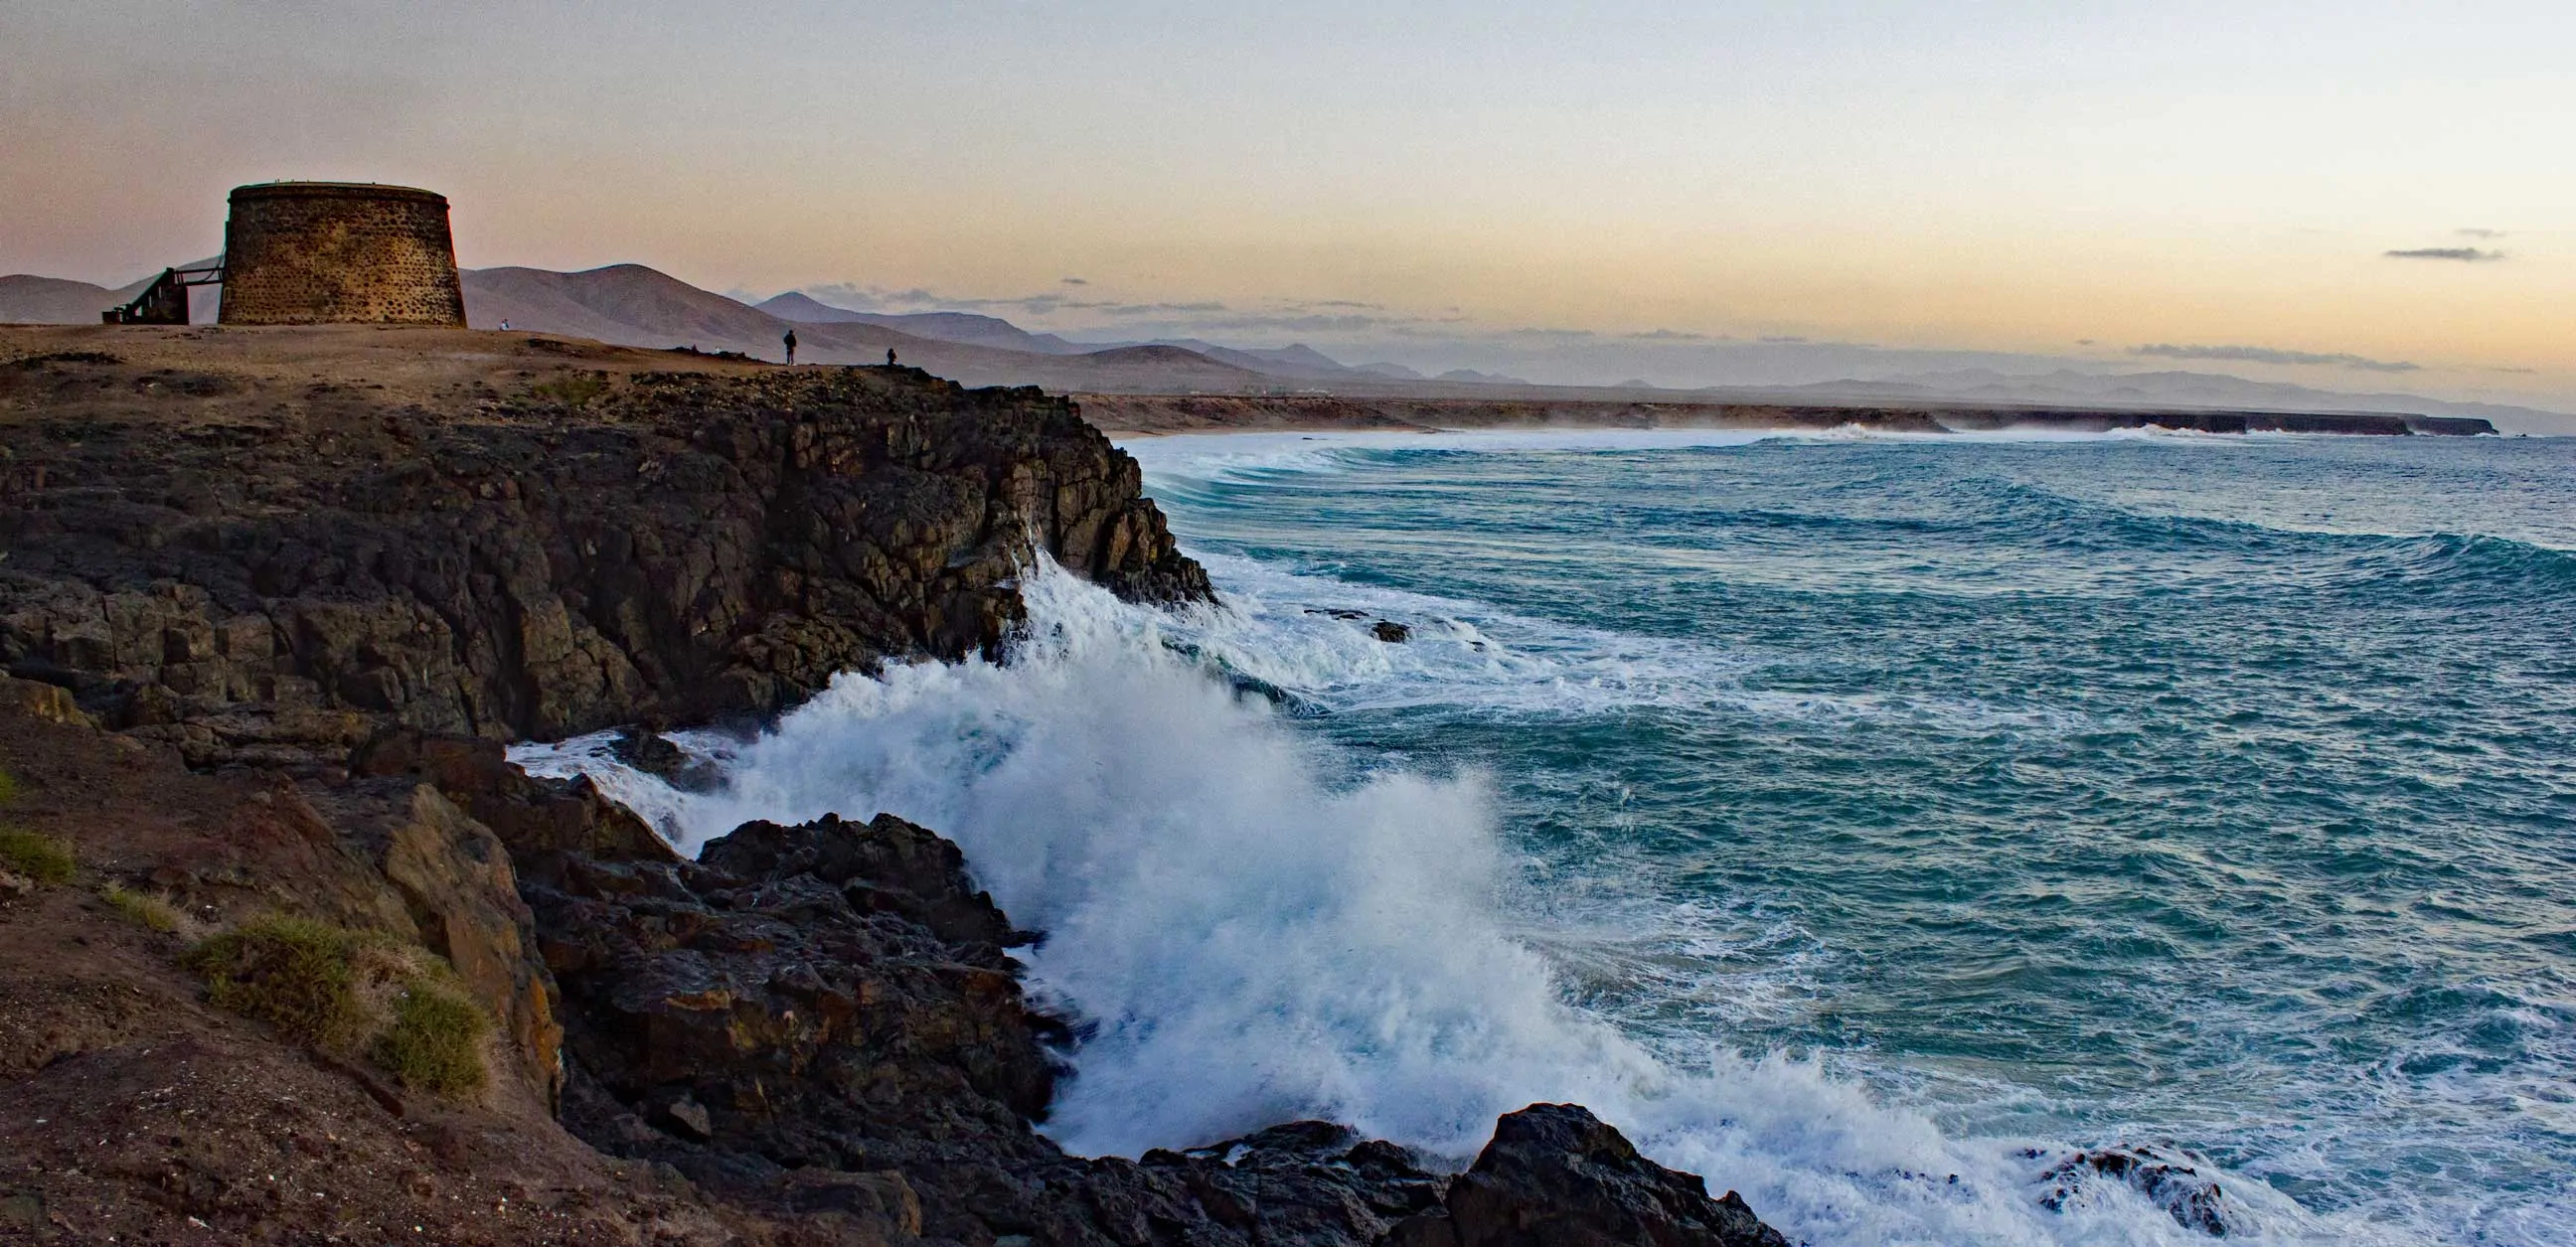 The West Coast of Fuerteventura – beautiful, rugged, and spectacular